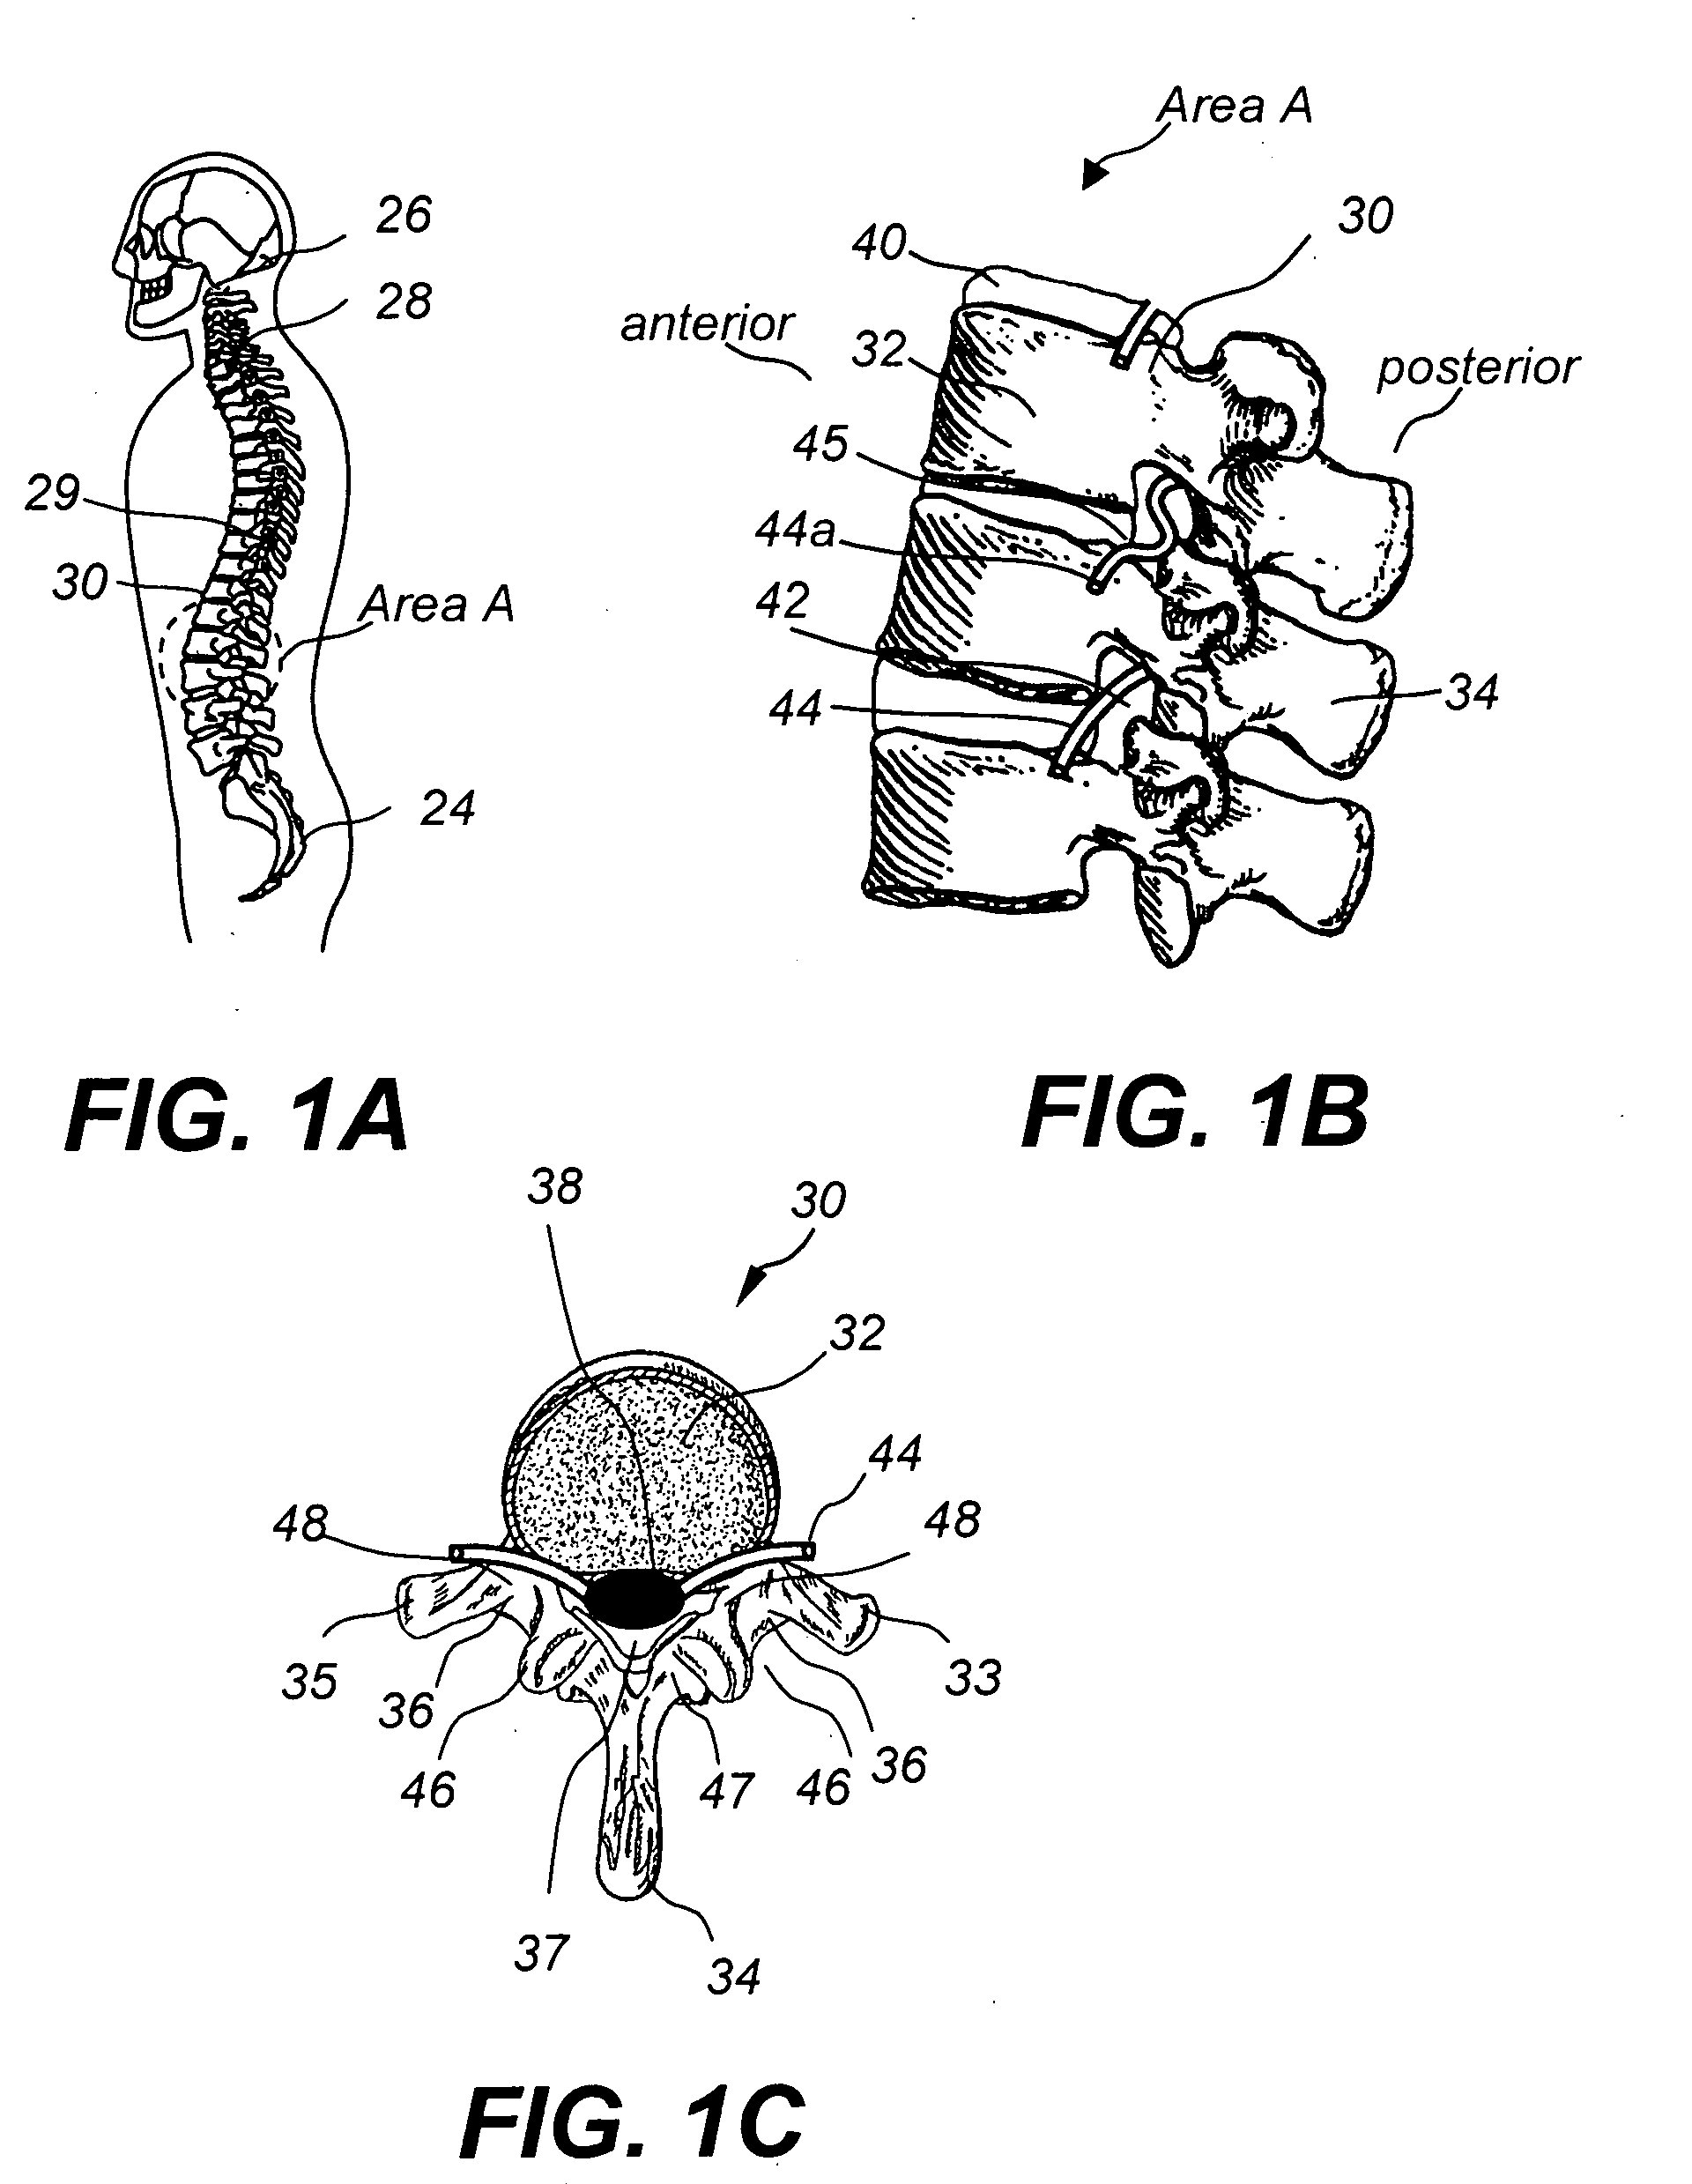 Method and device for kinematic retaining cervical plating